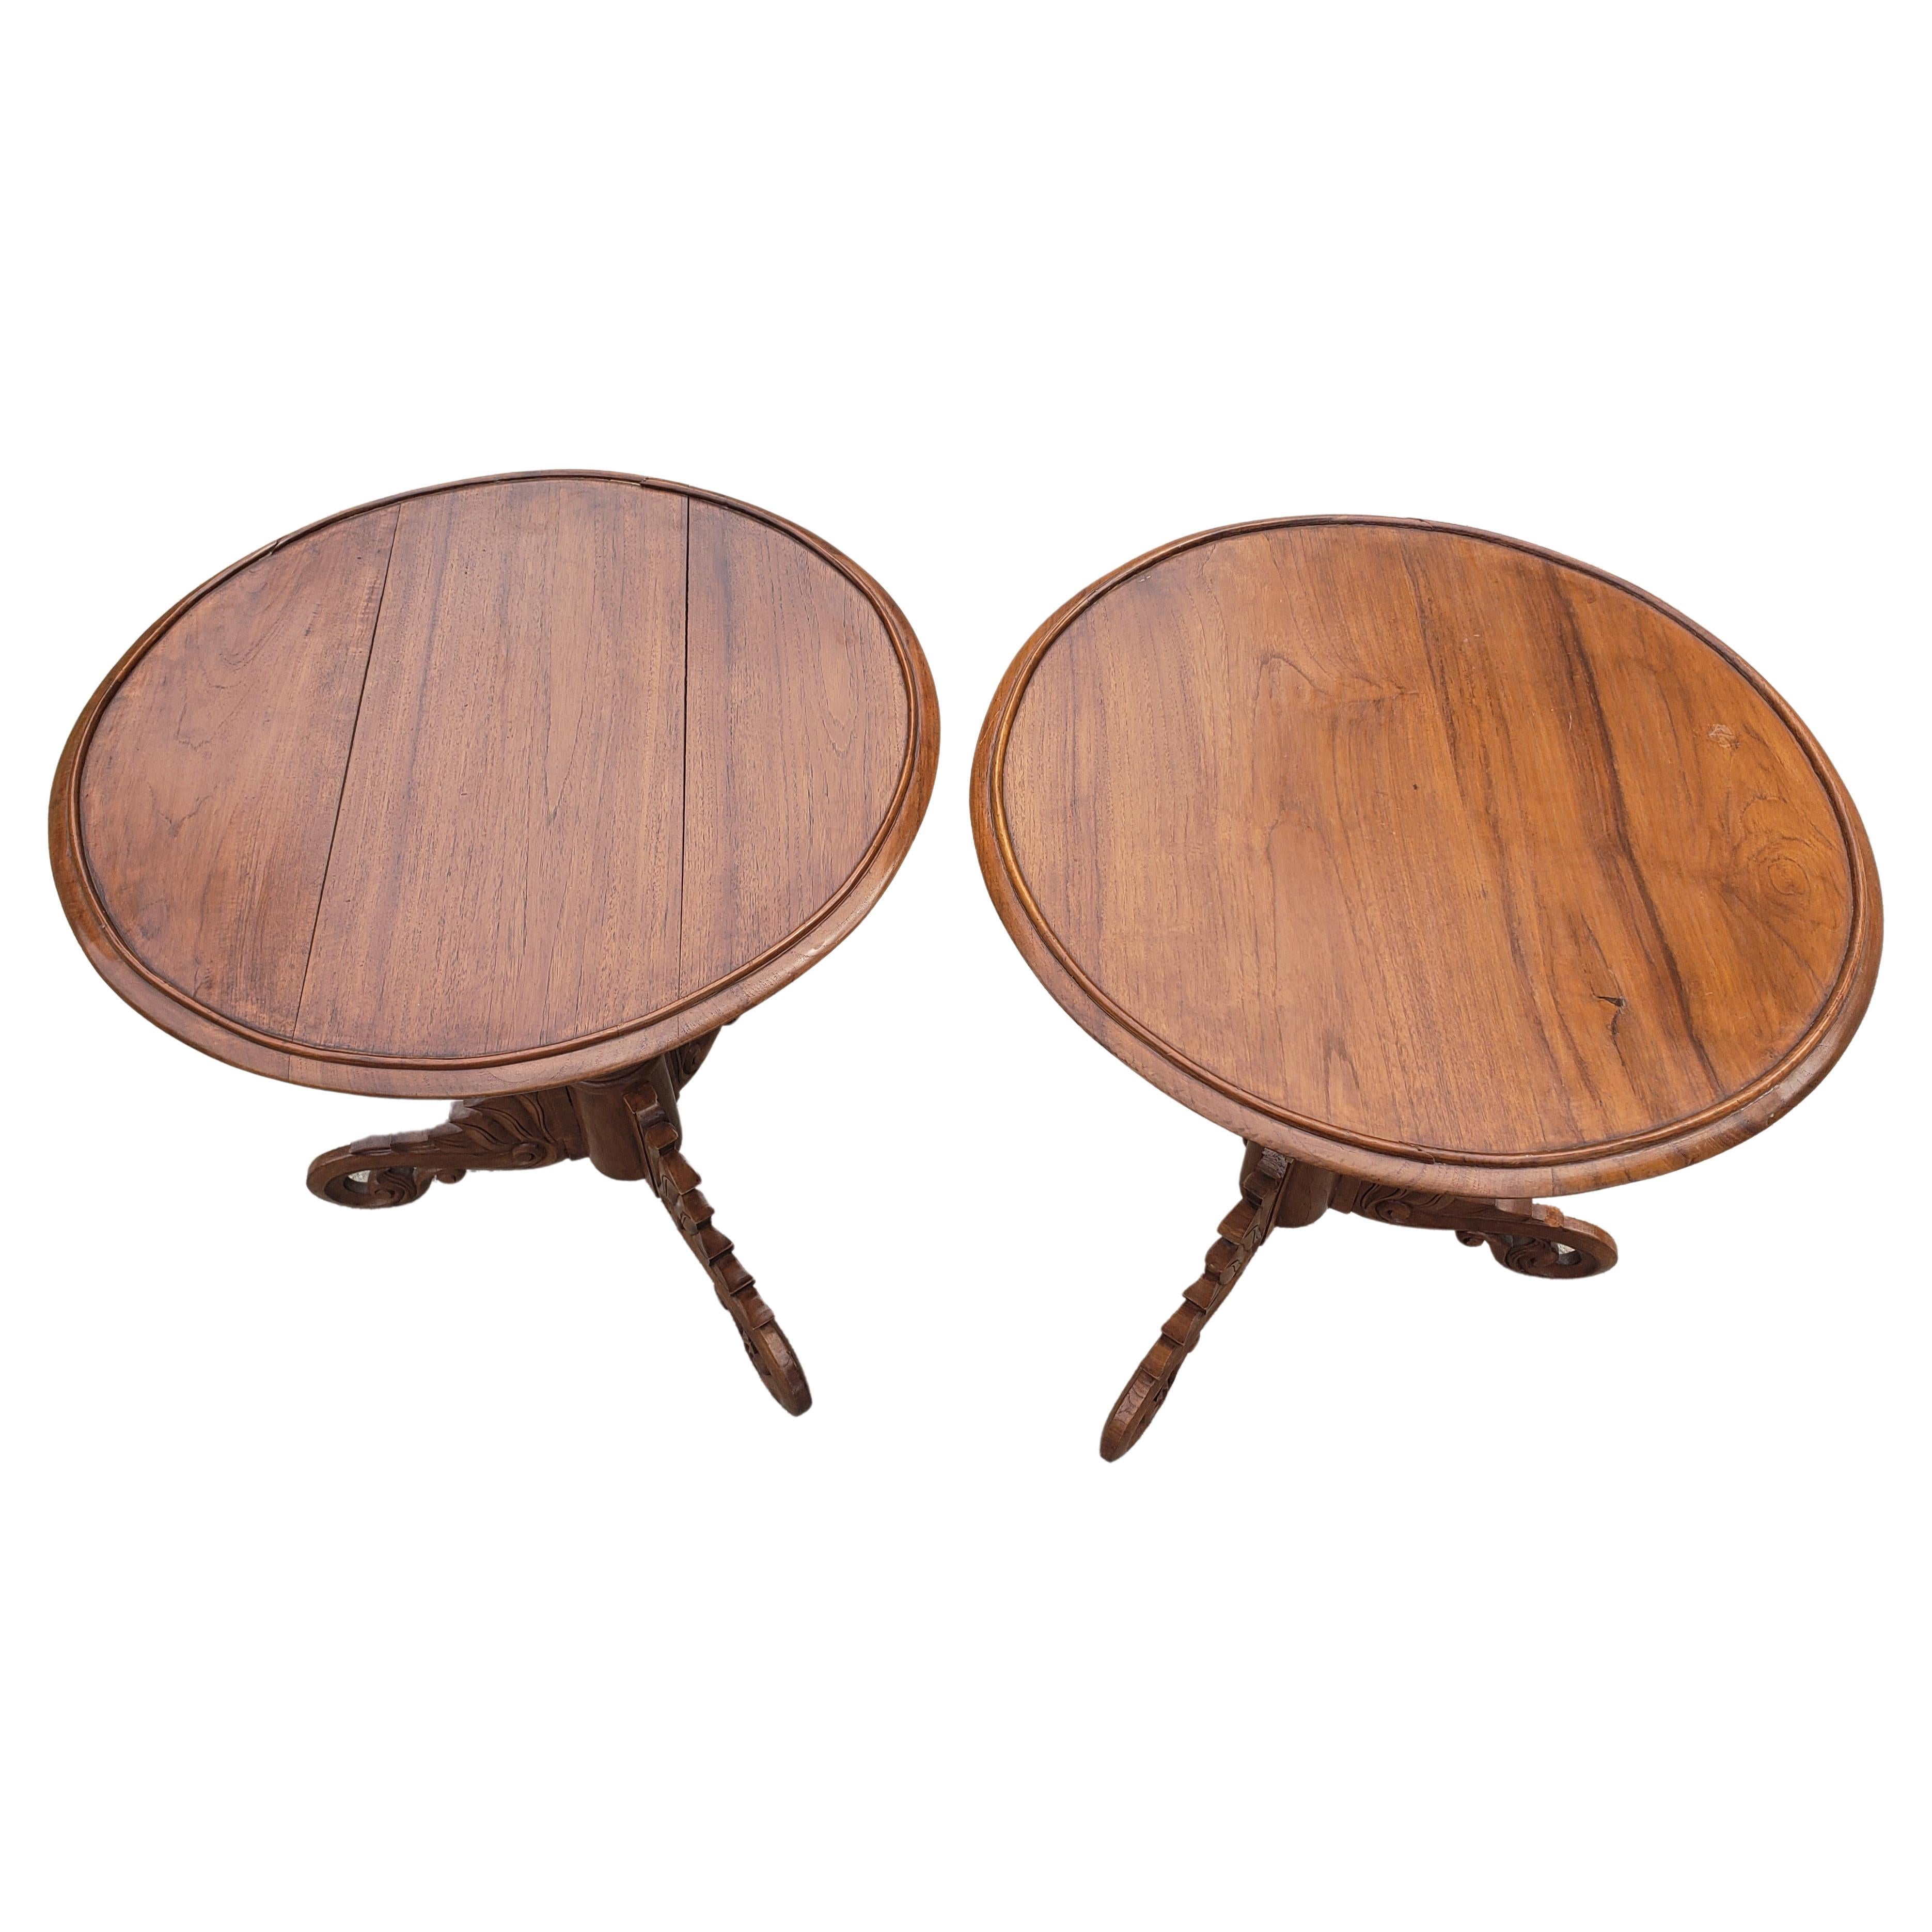 Vintage Pedestal Mahogany Tripod Gator Tail Feet Side Tables, a Pair In Good Condition For Sale In Germantown, MD